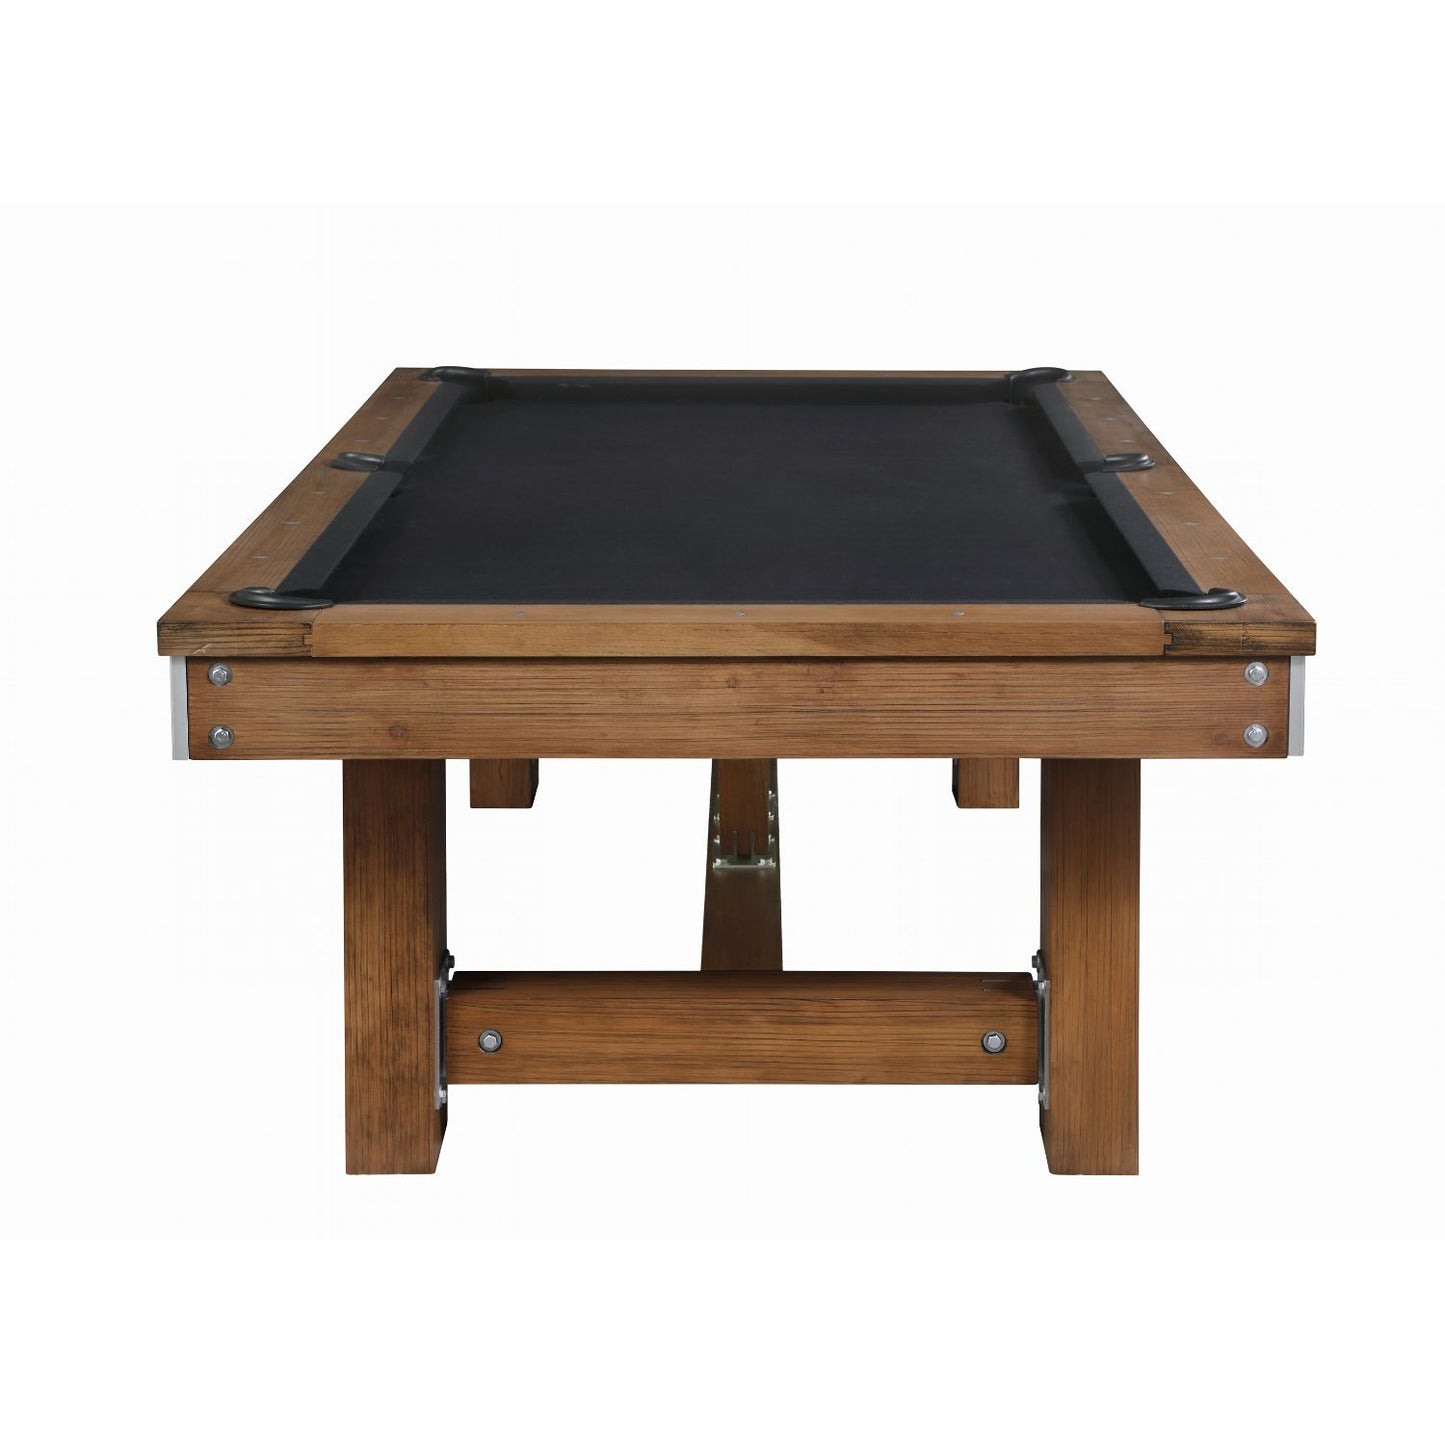 Playcraft Willow Bend Slate Pool Table with Optional Dining Top & Bench - Gaming Blaze